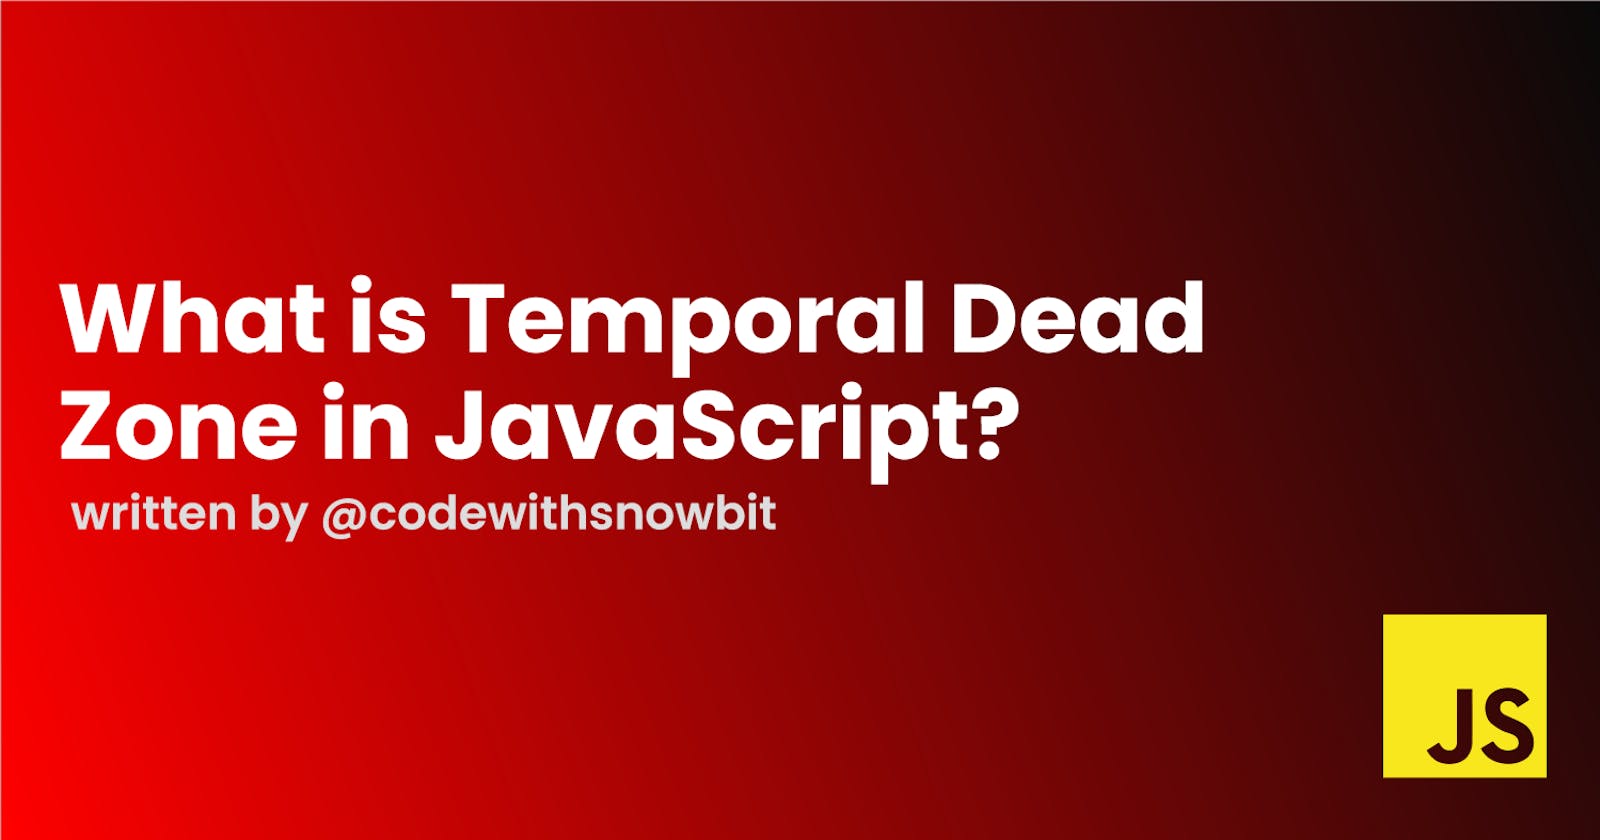 What is Temporal Dead Zone in JavaScript?